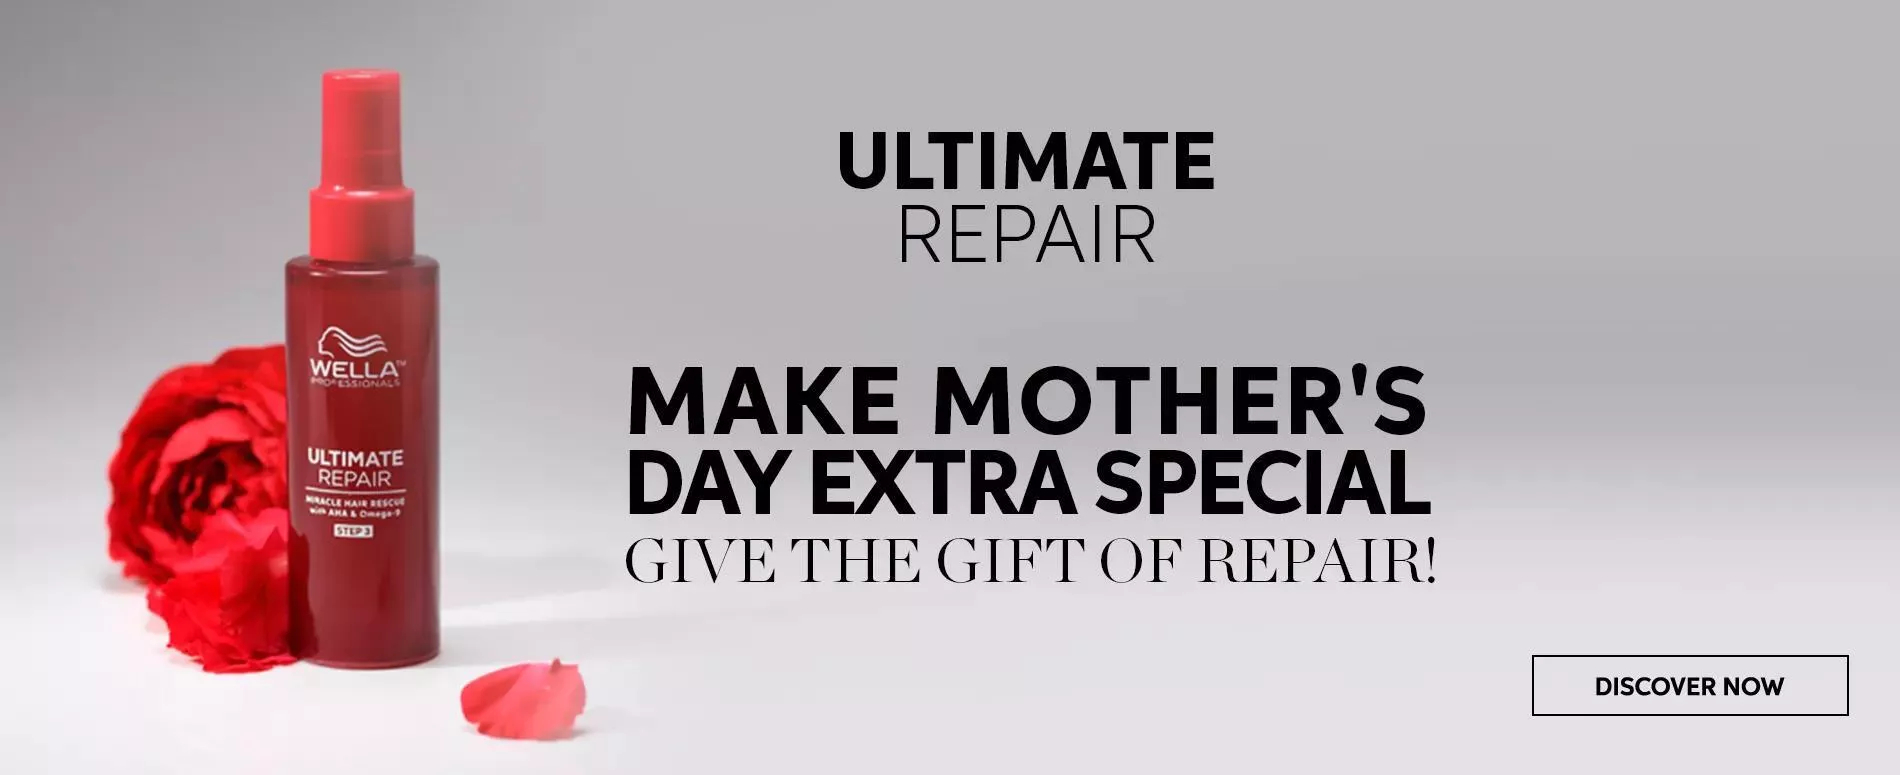 Make Mother's day extra special.